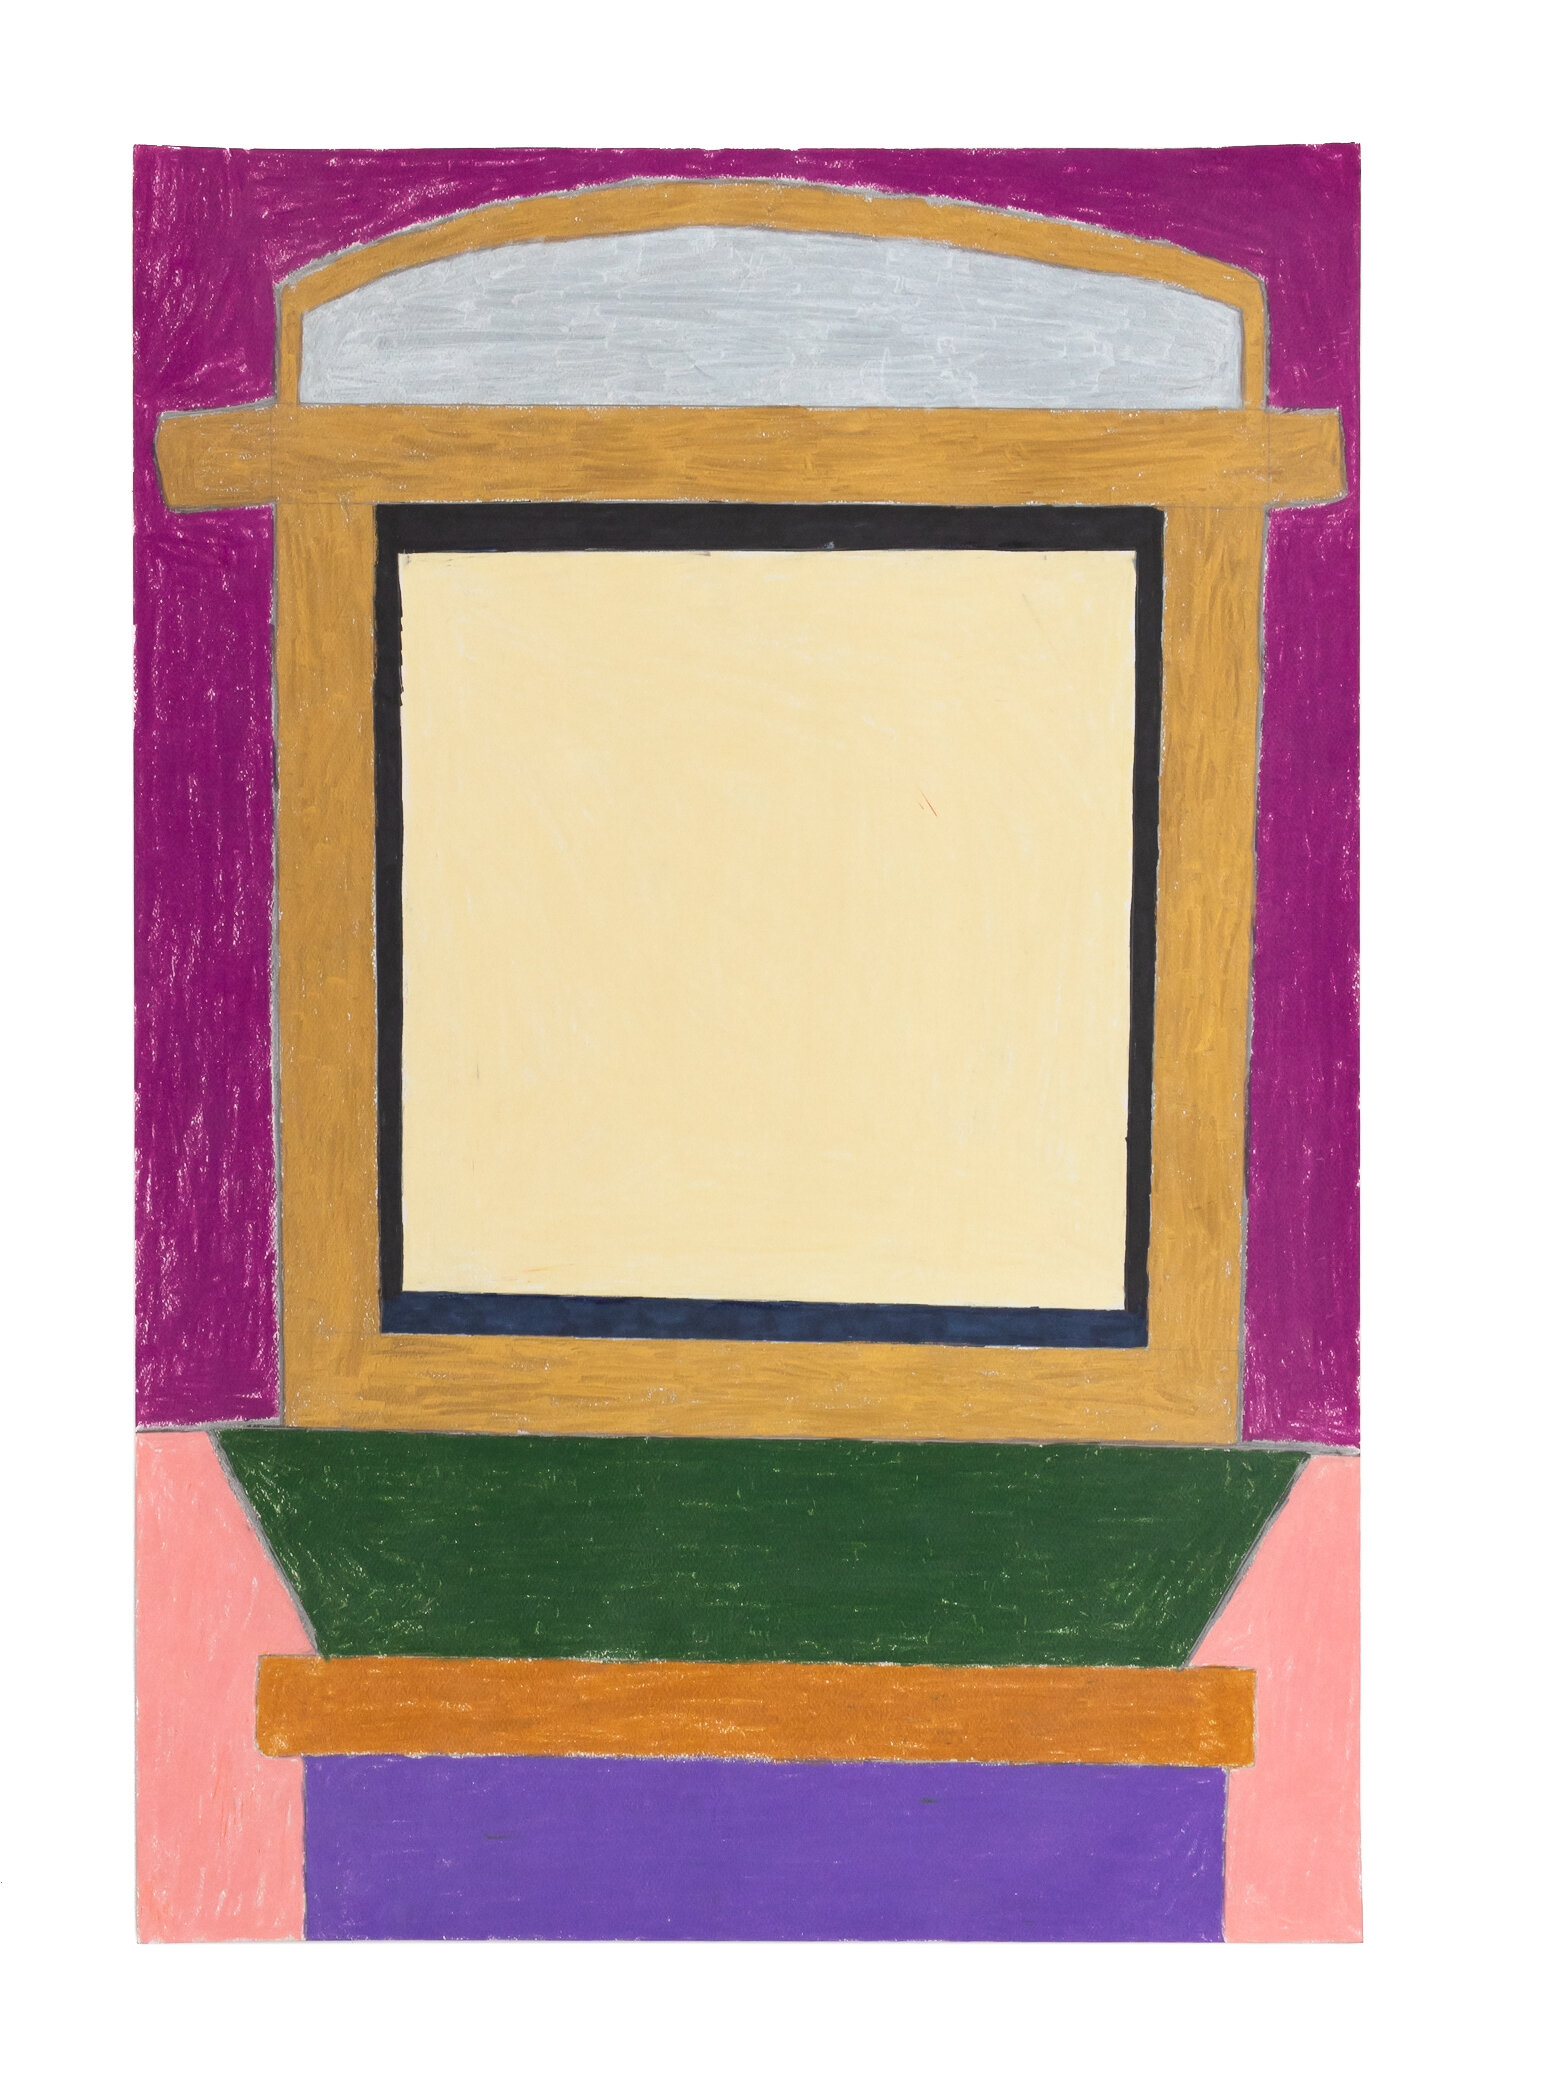 Dan Hamilton, Untitled (DH 64), ND, 15x22 inches, colored pencil on paper